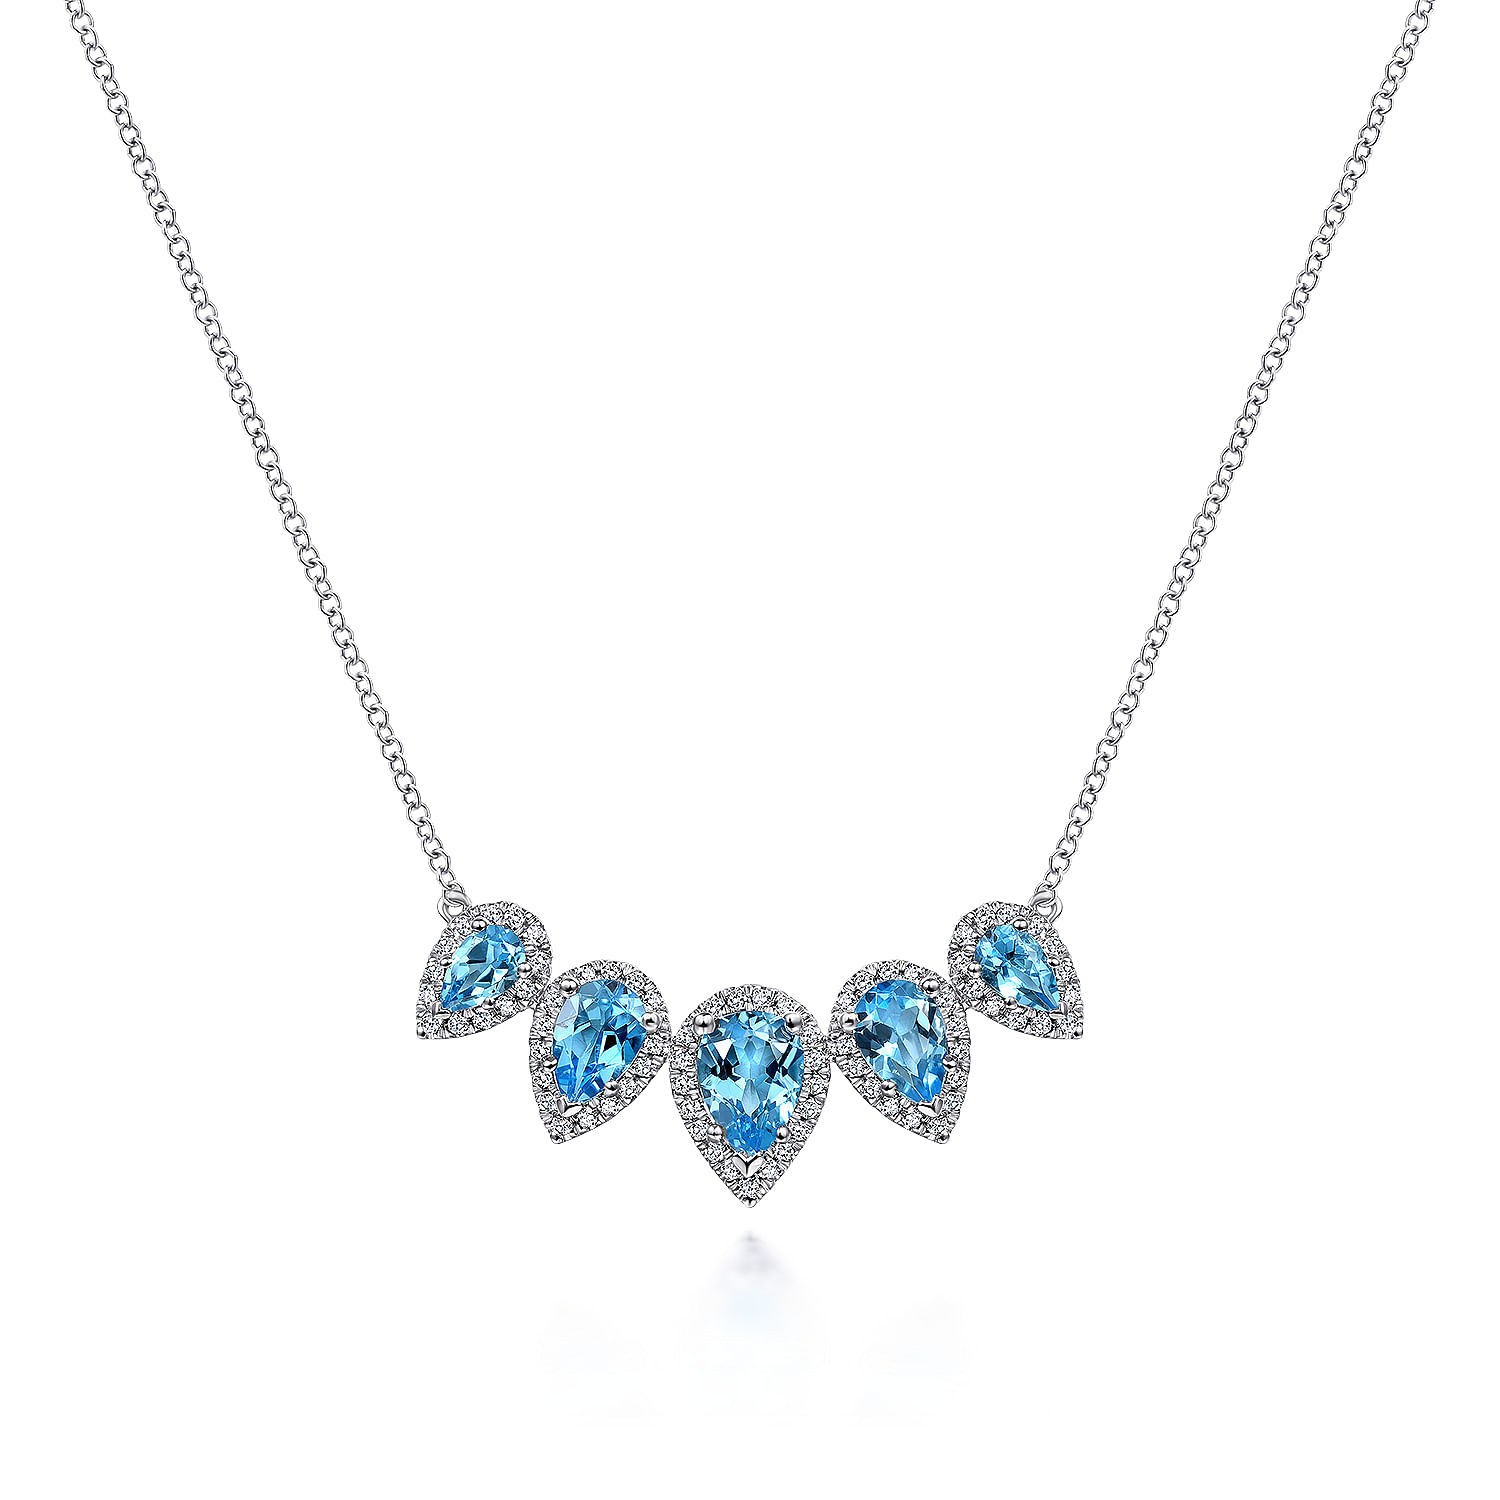 Gabriel - Graduating 14K White Gold Pear Shaped Blue Topaz and Diamond Halo Necklace